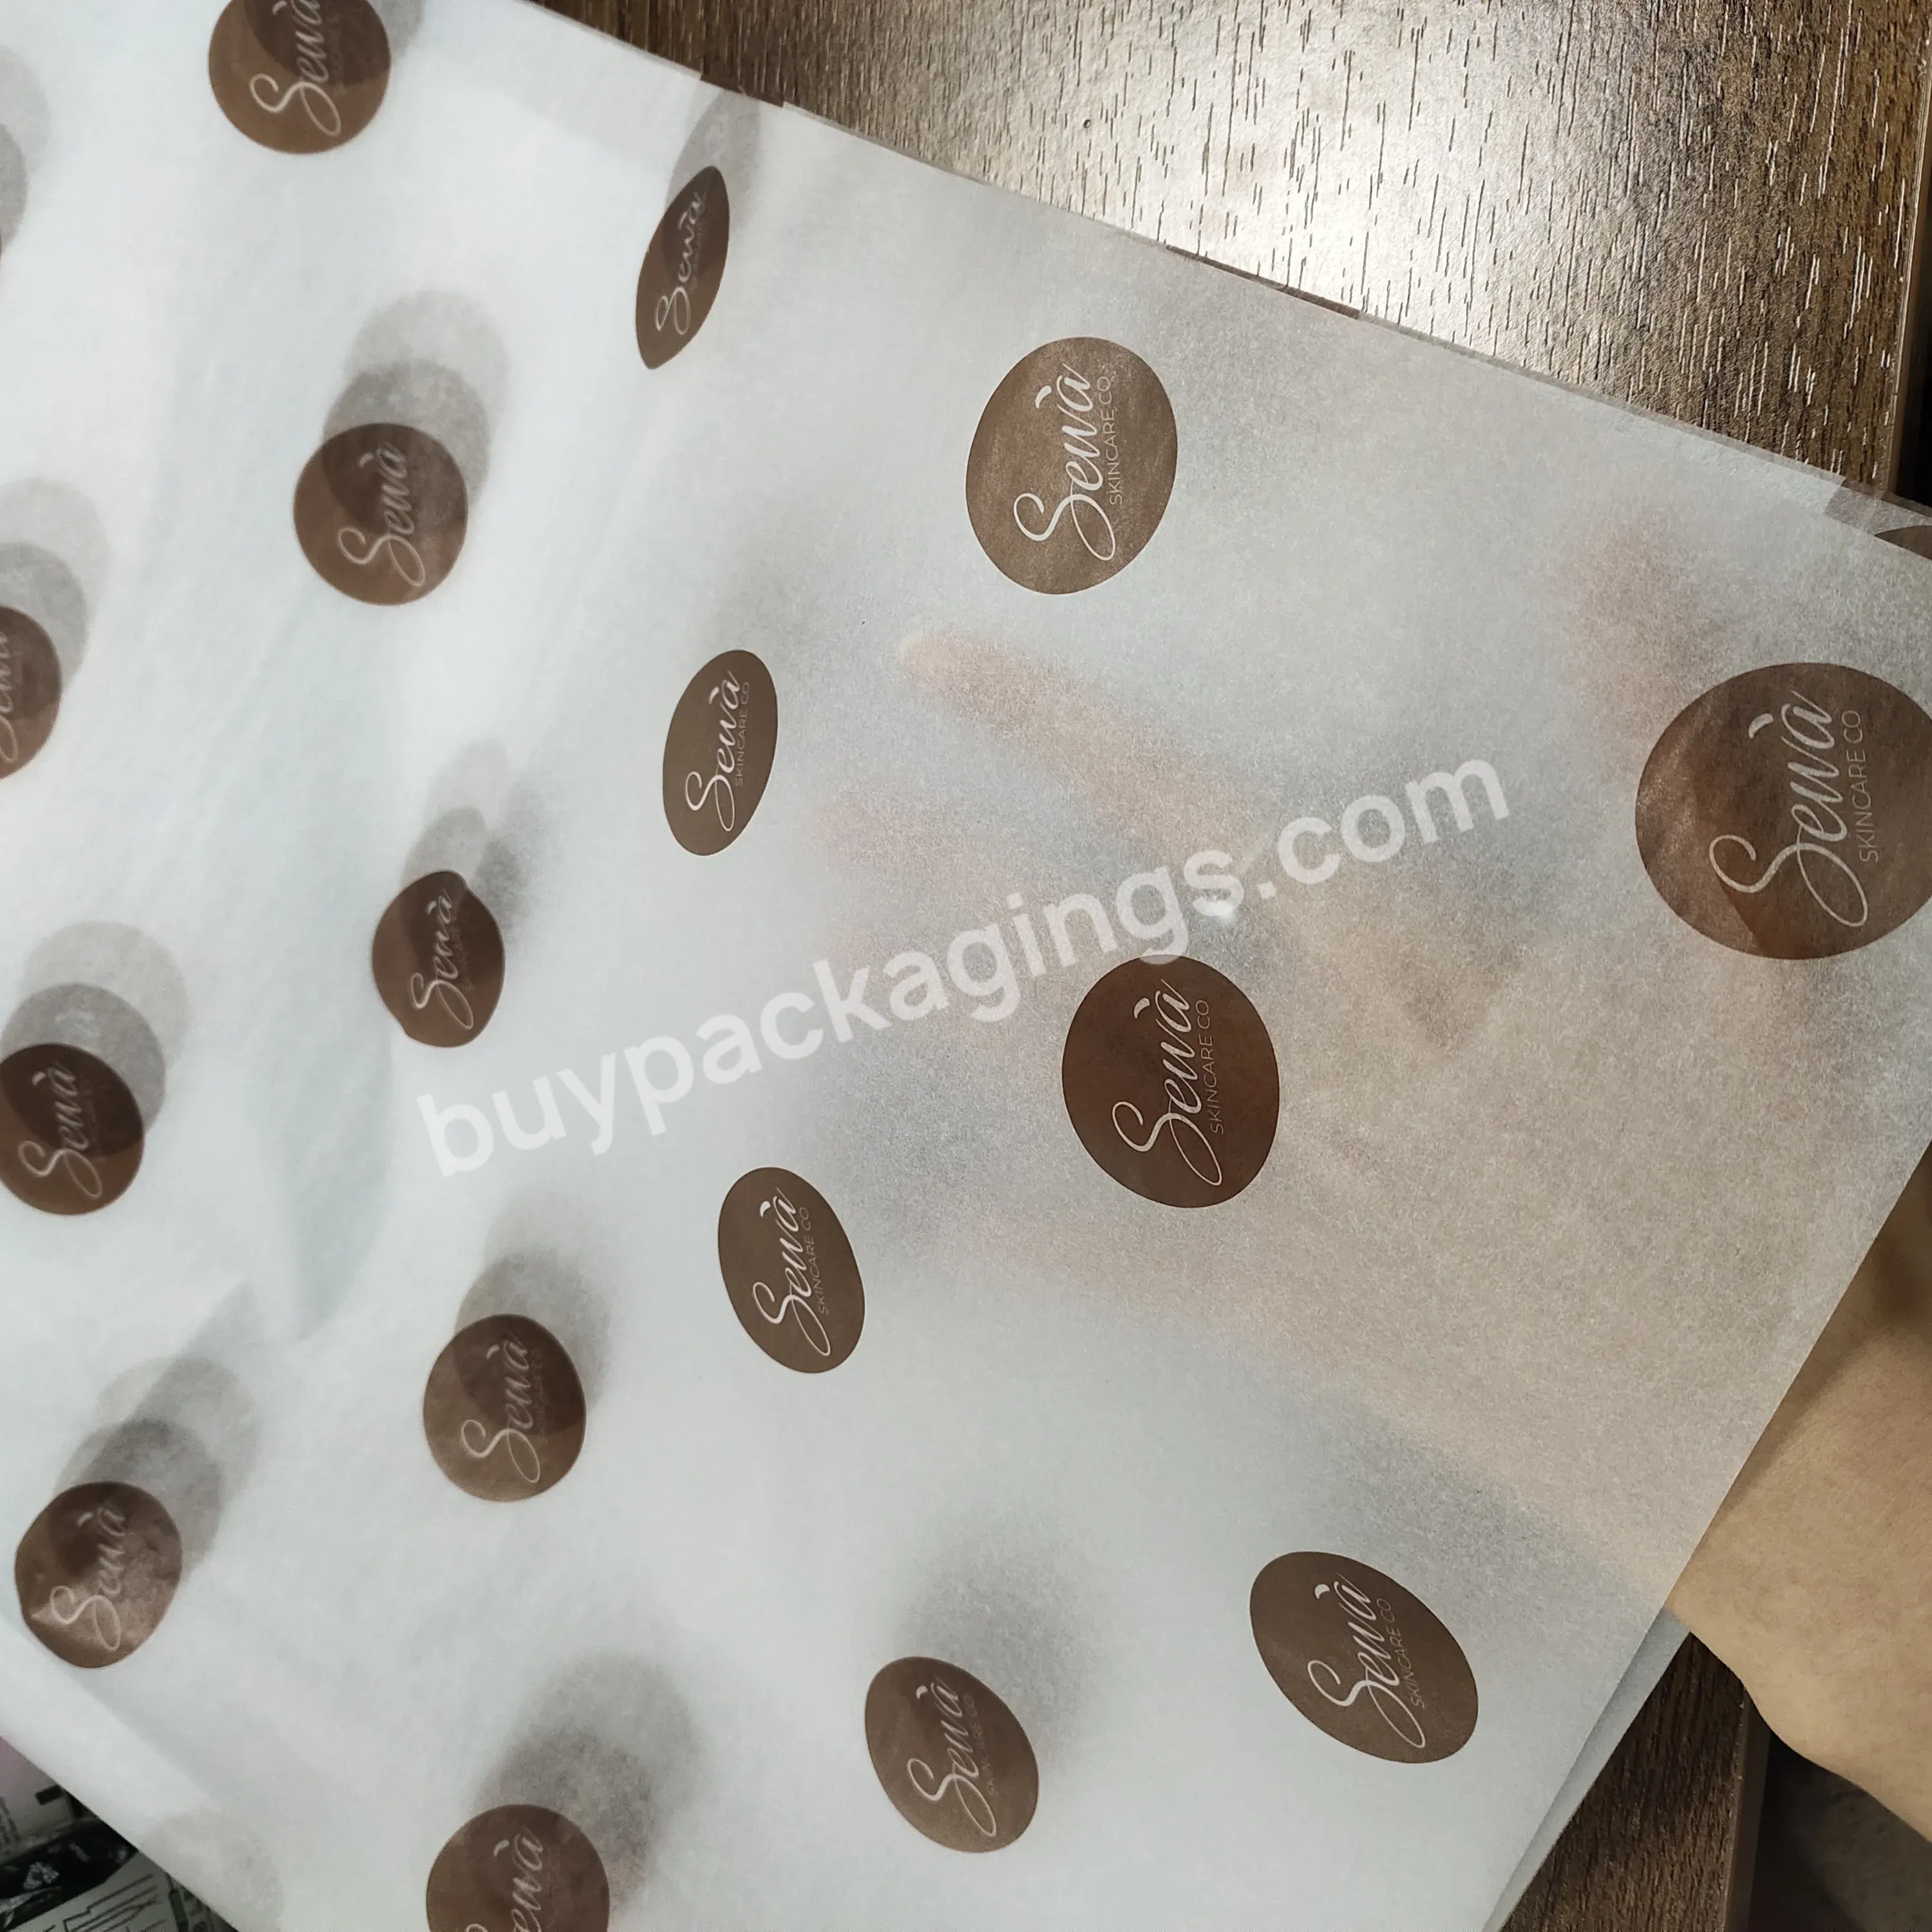 Custom Packing Paper Packaging Garment Wrapping Paper With Logo Custom Printed Tissue Paper - Buy Custom Printed Tissue Paper,Custom Packing Paper,Packaging Garment Wrapping Paper With Logo.